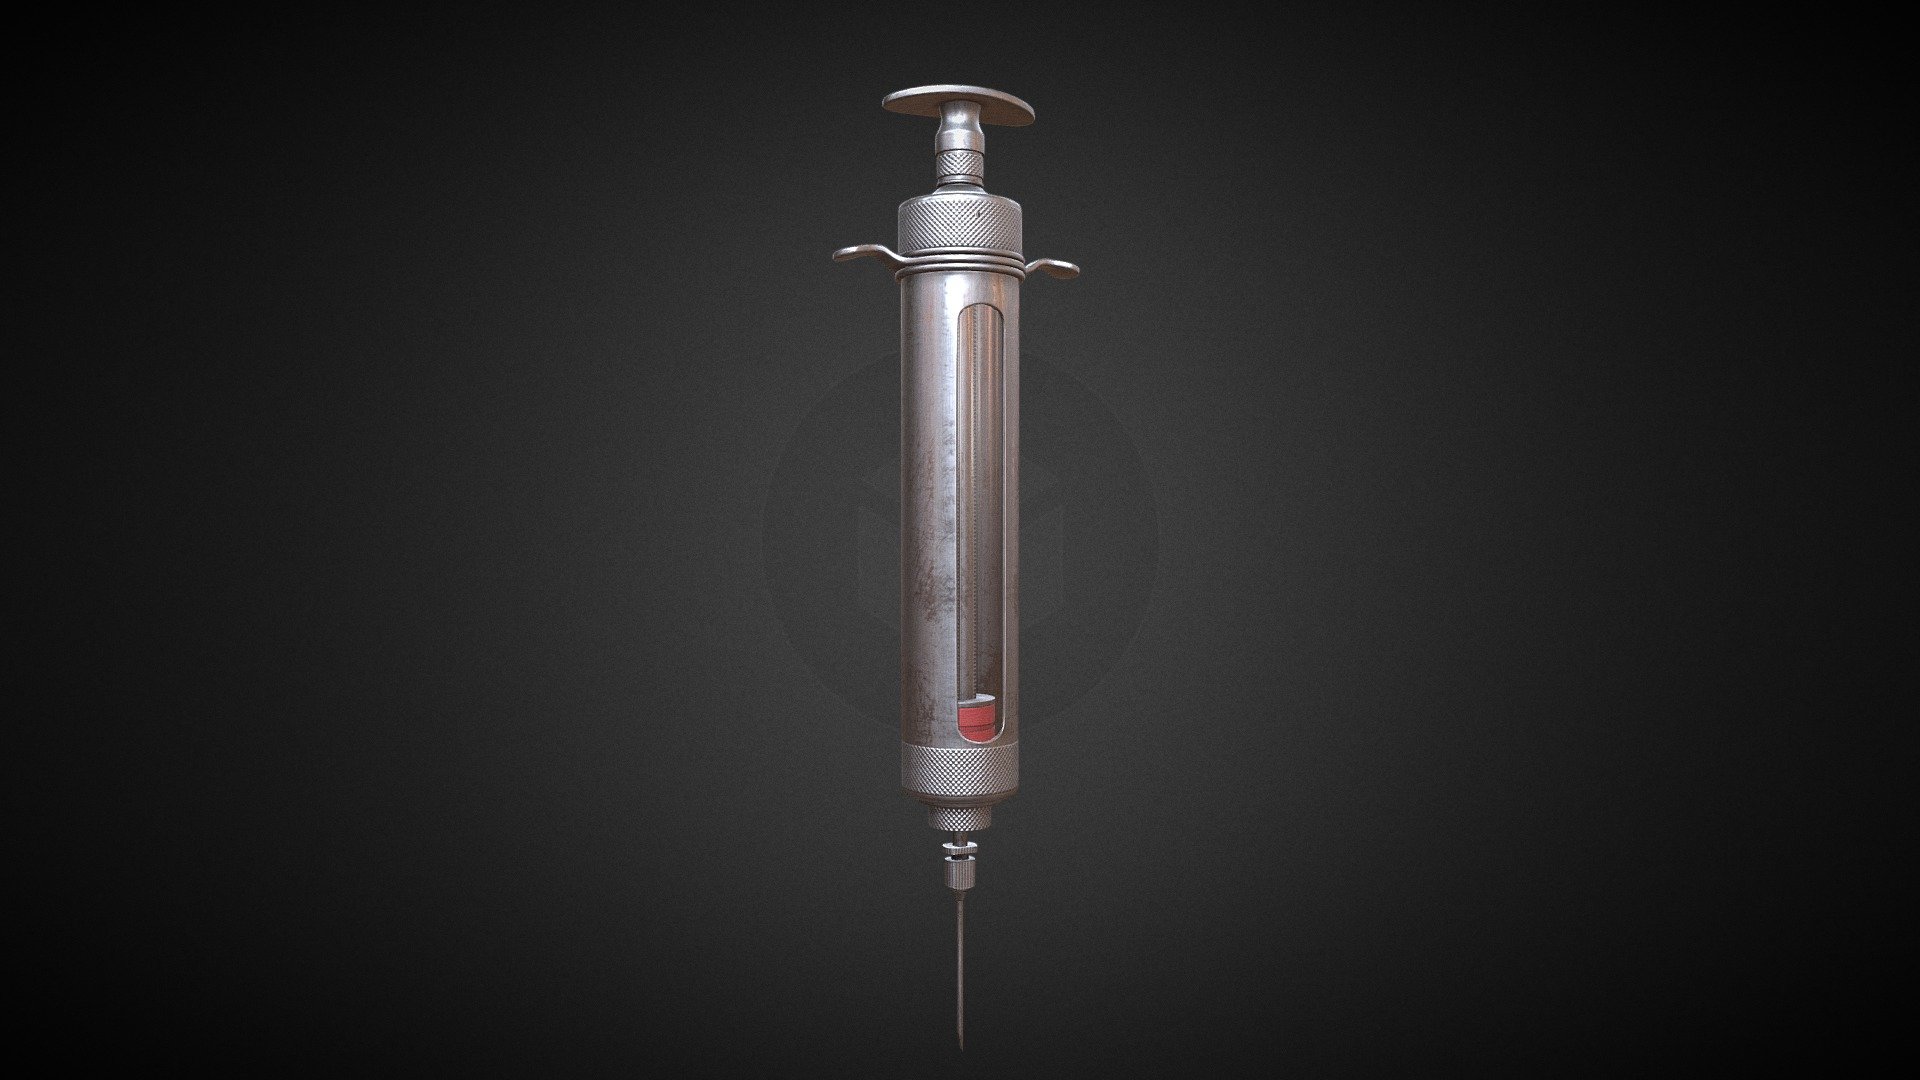 Tutorial here: https://www.youtube.com/channel/UC3R6lDf-Rlb9QW-D3CnhR7w

The model works perfectly in close-ups and high quality renders. It was originally modelled in 3ds Max 22, textured in Substance Painter and rendered with Marmoset Toolbag 3.

What is in the archive: MAX_22; OBJ; FBX ; Textures (2k resolution)

Features: Model resolutions are optimized for polygon efficiency. Model is fully textured with all materials applied. All textures and materials are included and mapped in every format. Autodesk 3ds Max models grouped for easy selection &amp; objects are logically named for ease of scene management. No cleaning up necessary, just drop model into your scene and start rendering. No special plugin needed to open scene.

Textures formats: PNG (2K) - Vintage Syringe - Tutorial Included - Buy Royalty Free 3D model by ninashaw 3d model